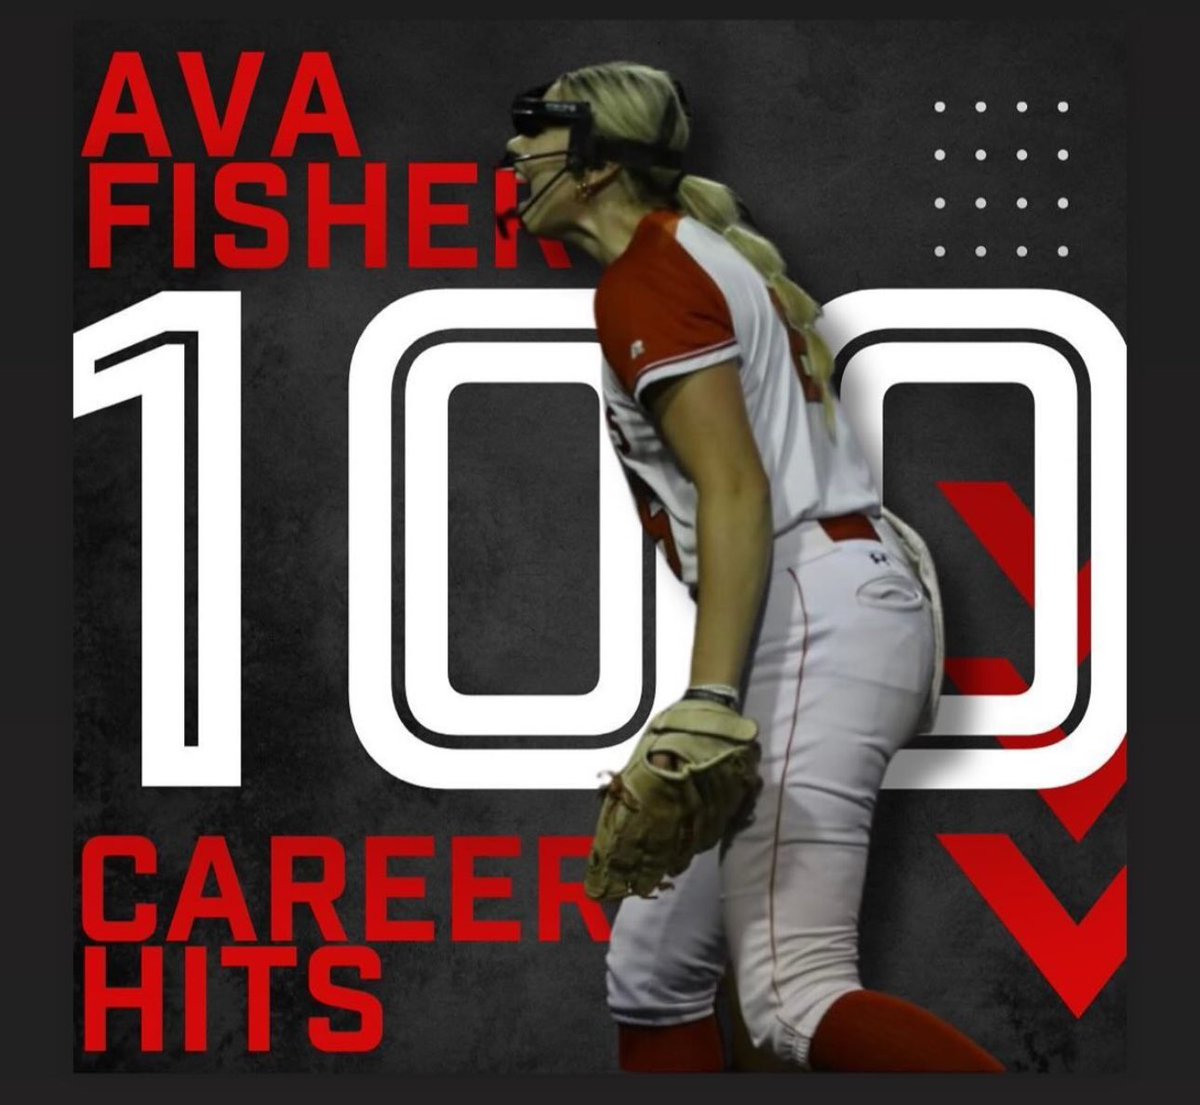 Congratulations to Ava Fisher who reached her 💯 career high school hit tonight! She is also three RBIs, shy of her 100th! Great job @avafisher2024 @Ladydukesnj @ExtraInningSB @ShaneWinkler